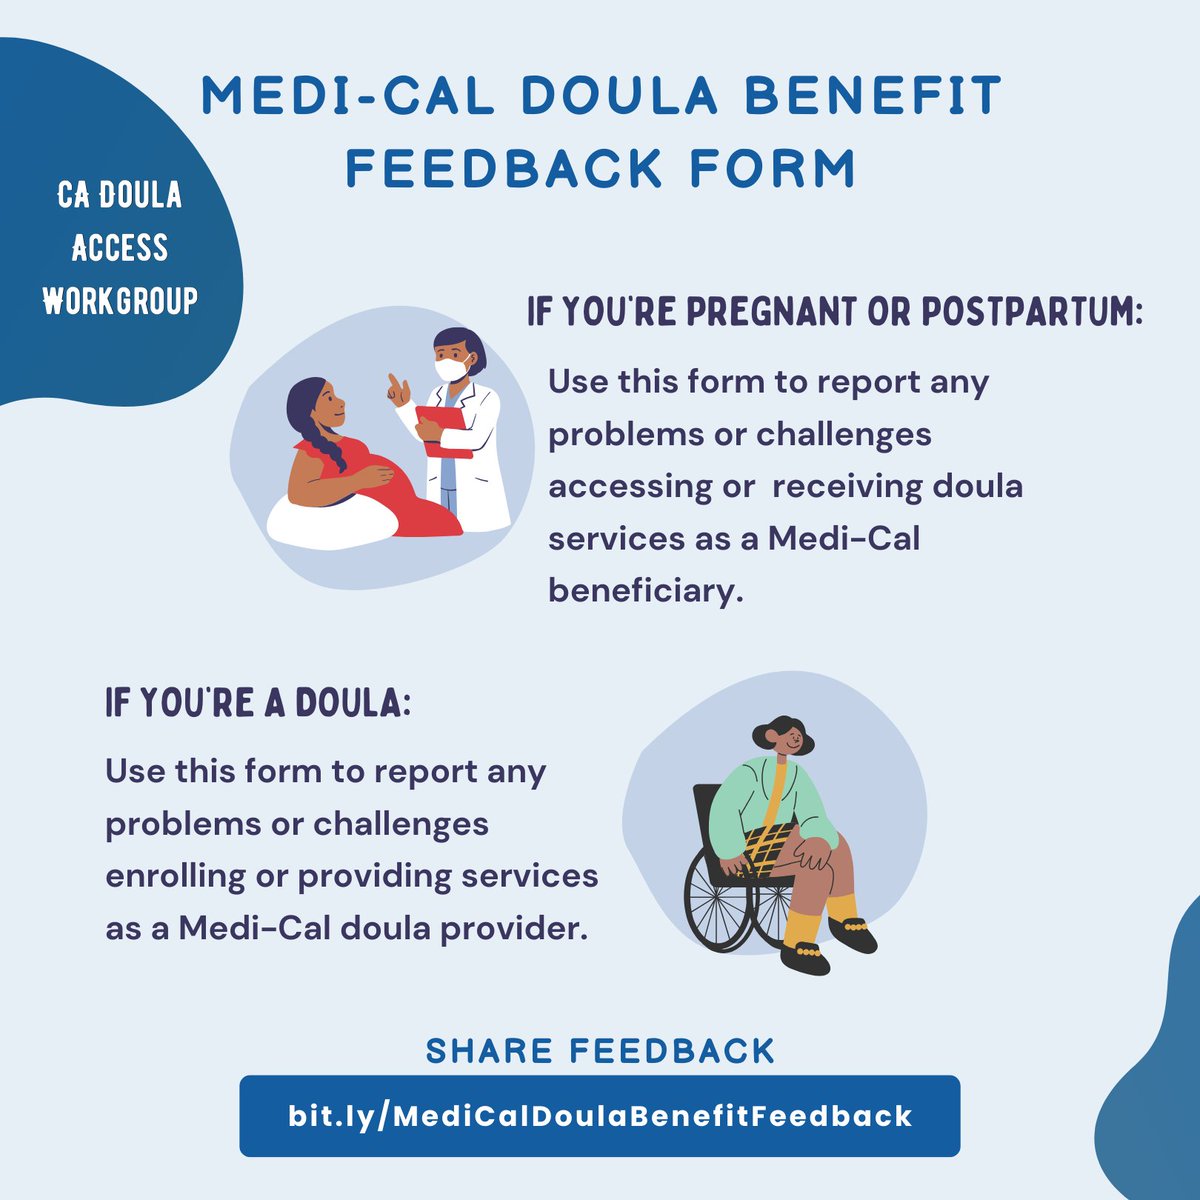 Join us in improving access and dismantling barriers to doula support in California! Are you a doula enrolling or serving as a Medi-Cal provider? Or a pregnant or postpartum Medi-Cal recipient? Tell us about your experience through the Medi-Cal benefit: bit.ly/MediCalDoulaBe…